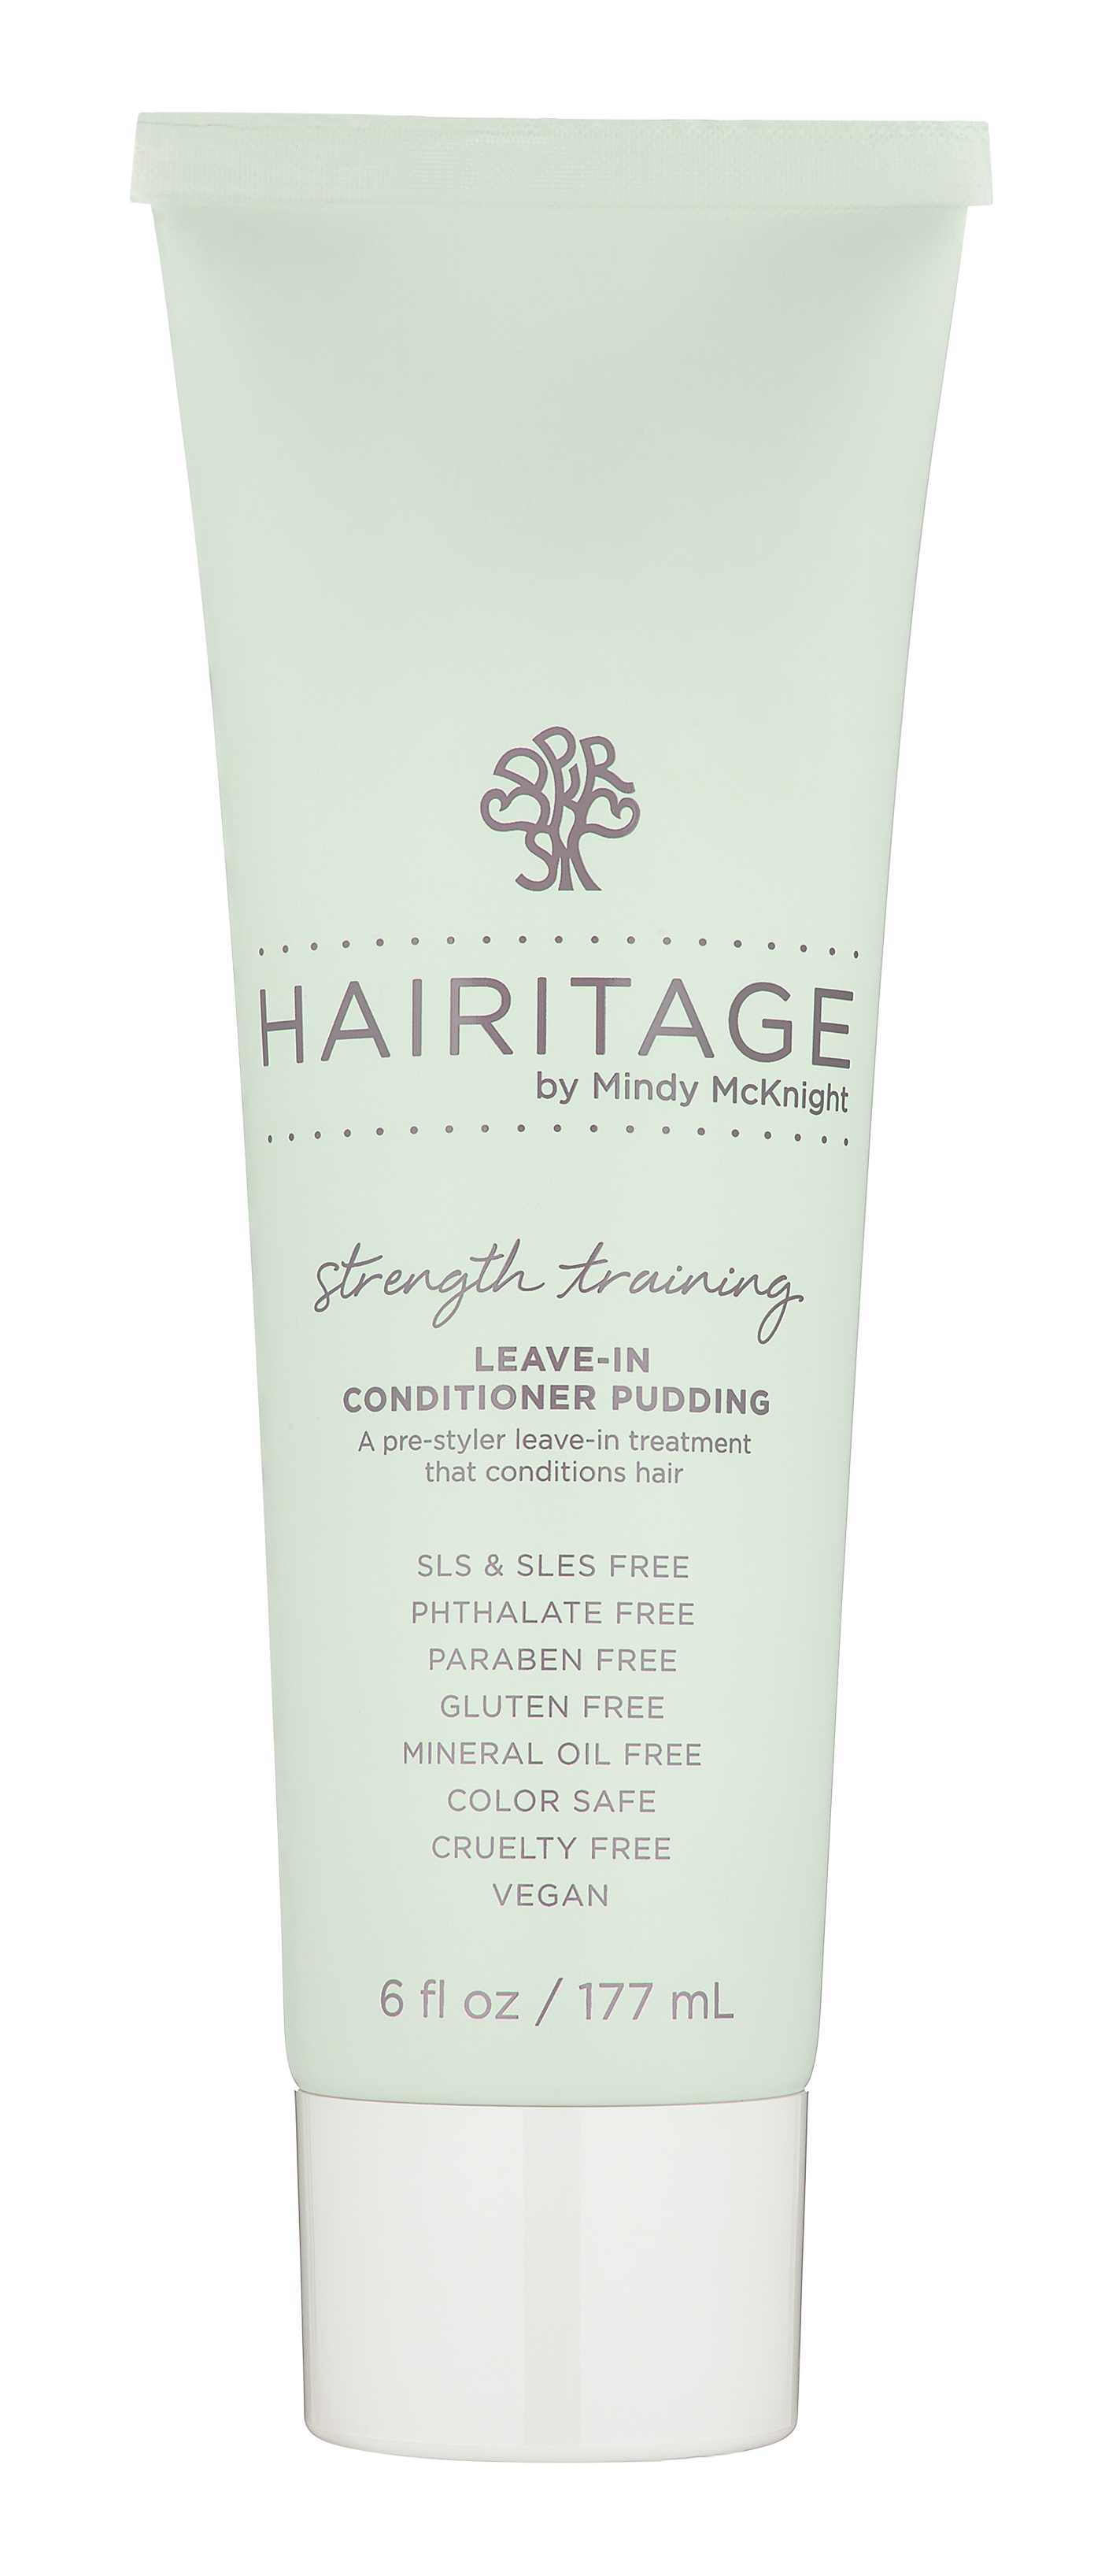 Hairitage by Mindy McKnight! Hairitage Strength Training Leave In Conditioner Pudding